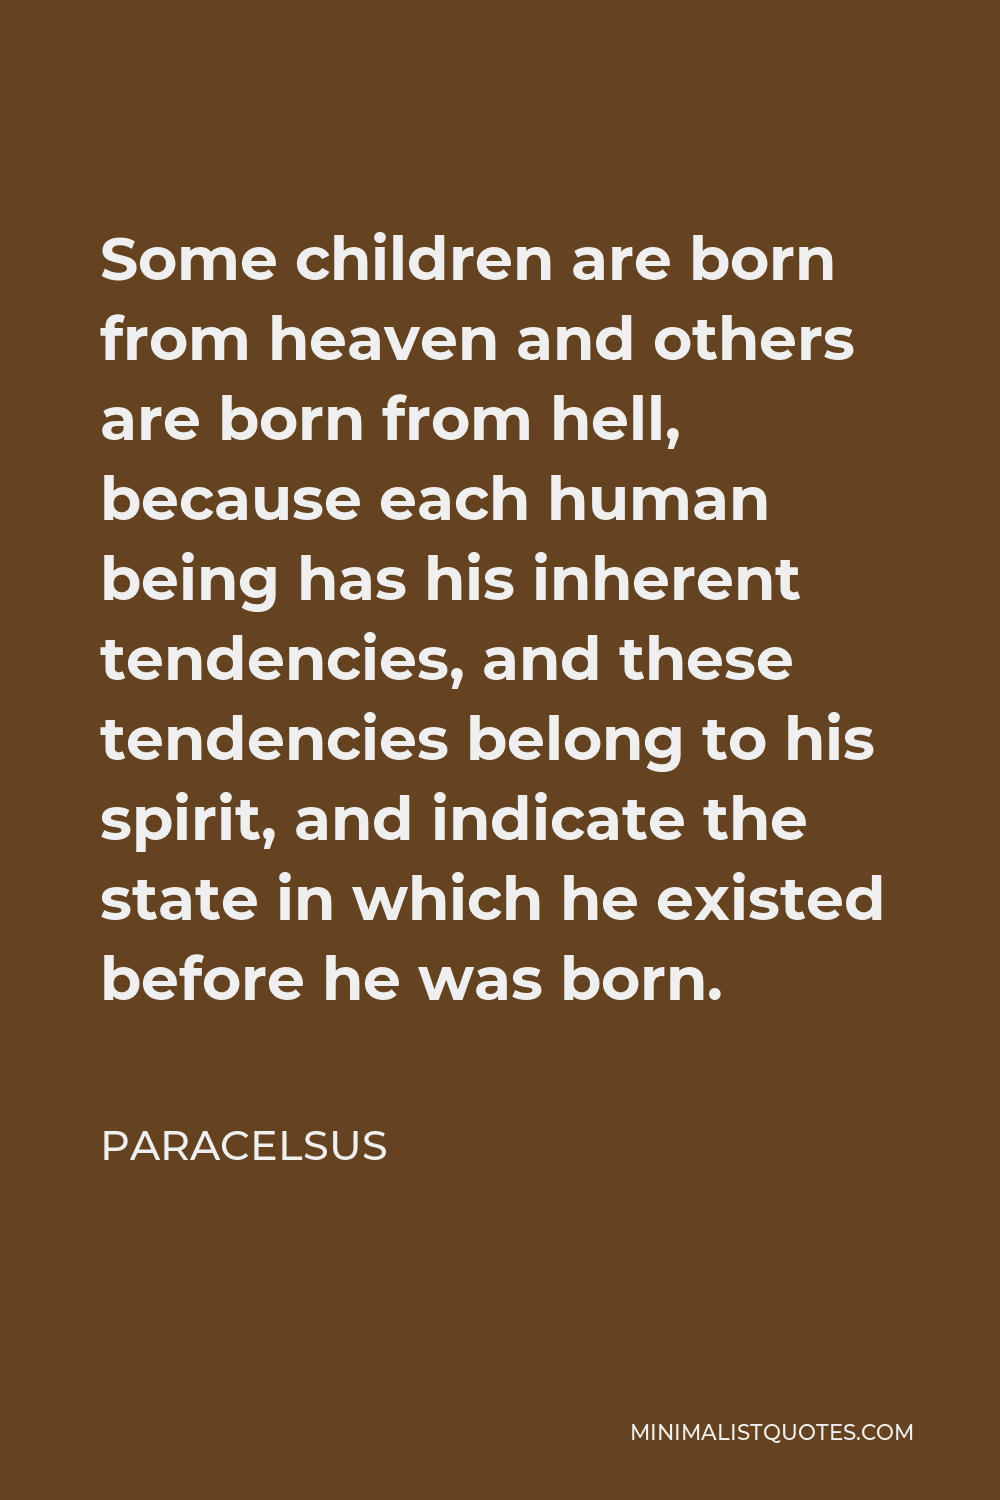 Paracelsus Quote - Some children are born from heaven and others are born from hell, because each human being has his inherent tendencies, and these tendencies belong to his spirit, and indicate the state in which he existed before he was born.